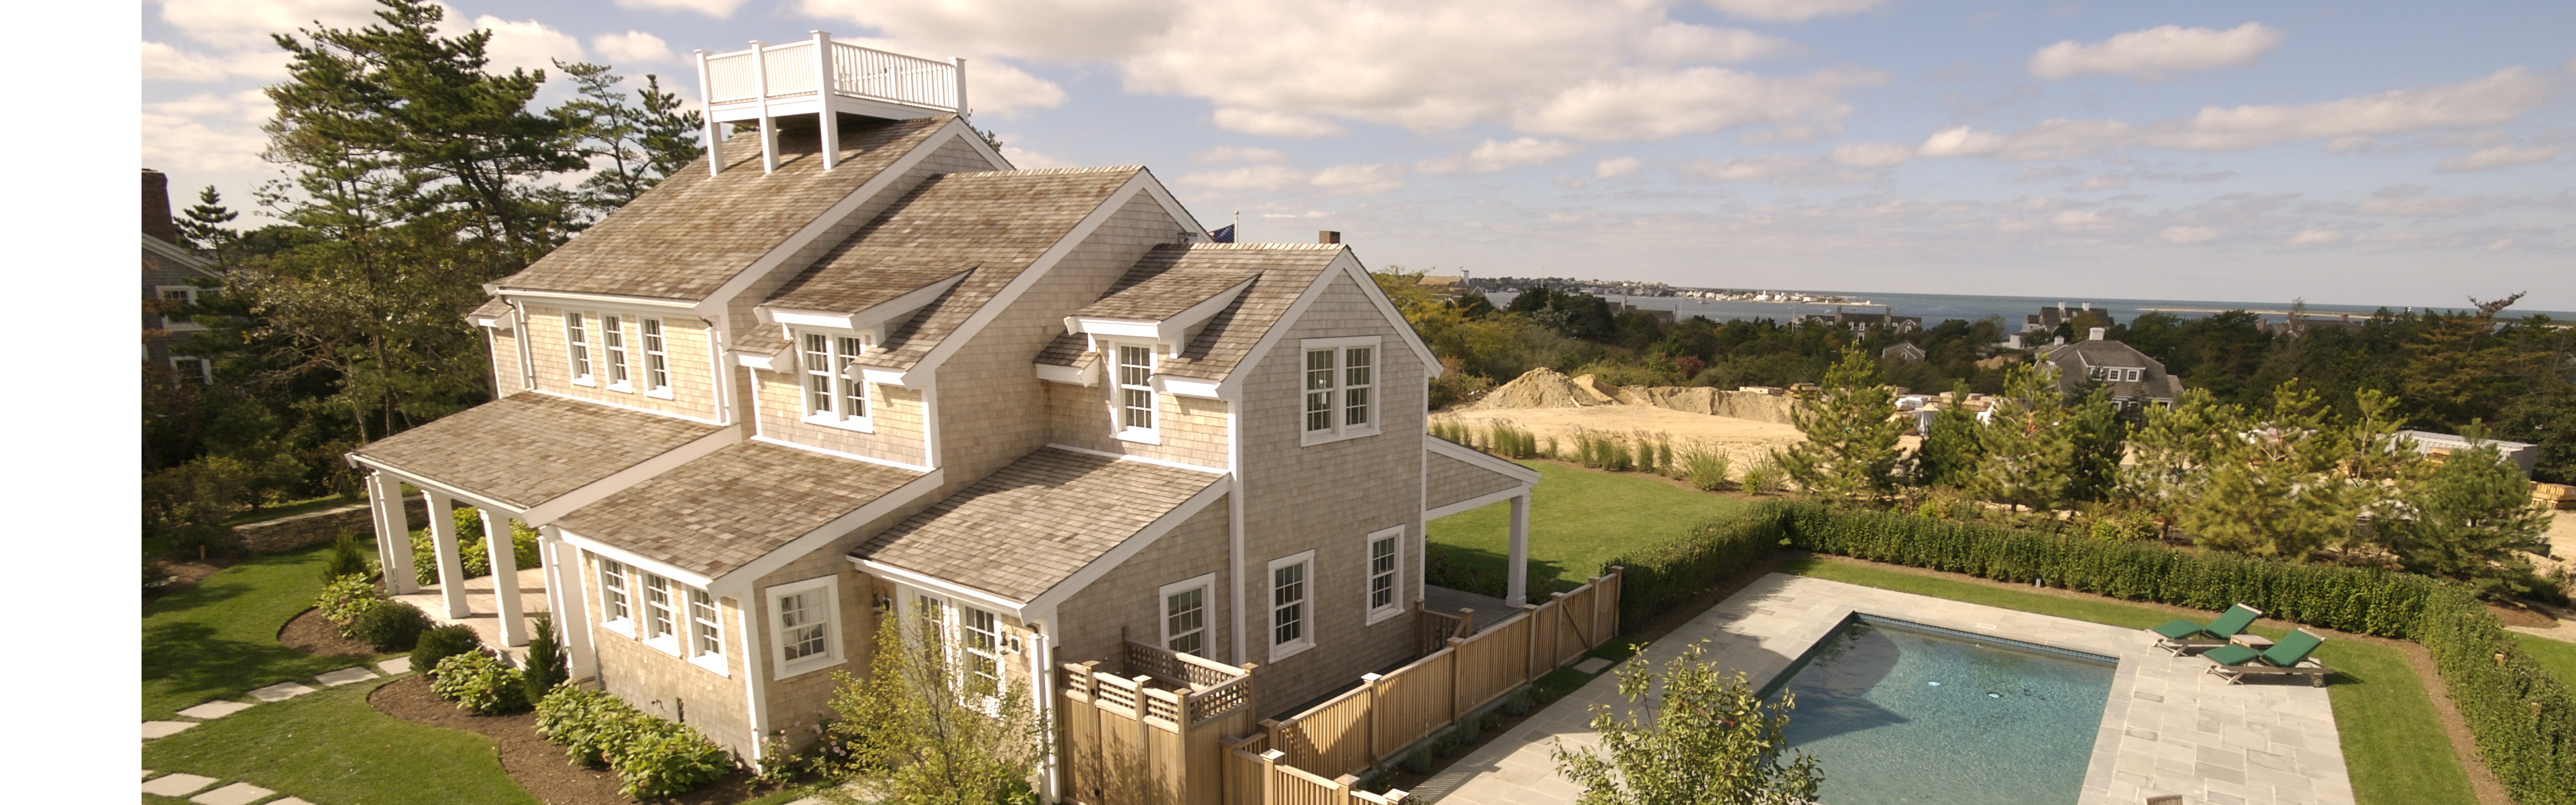 Nantucket vacation home by Shay Construction